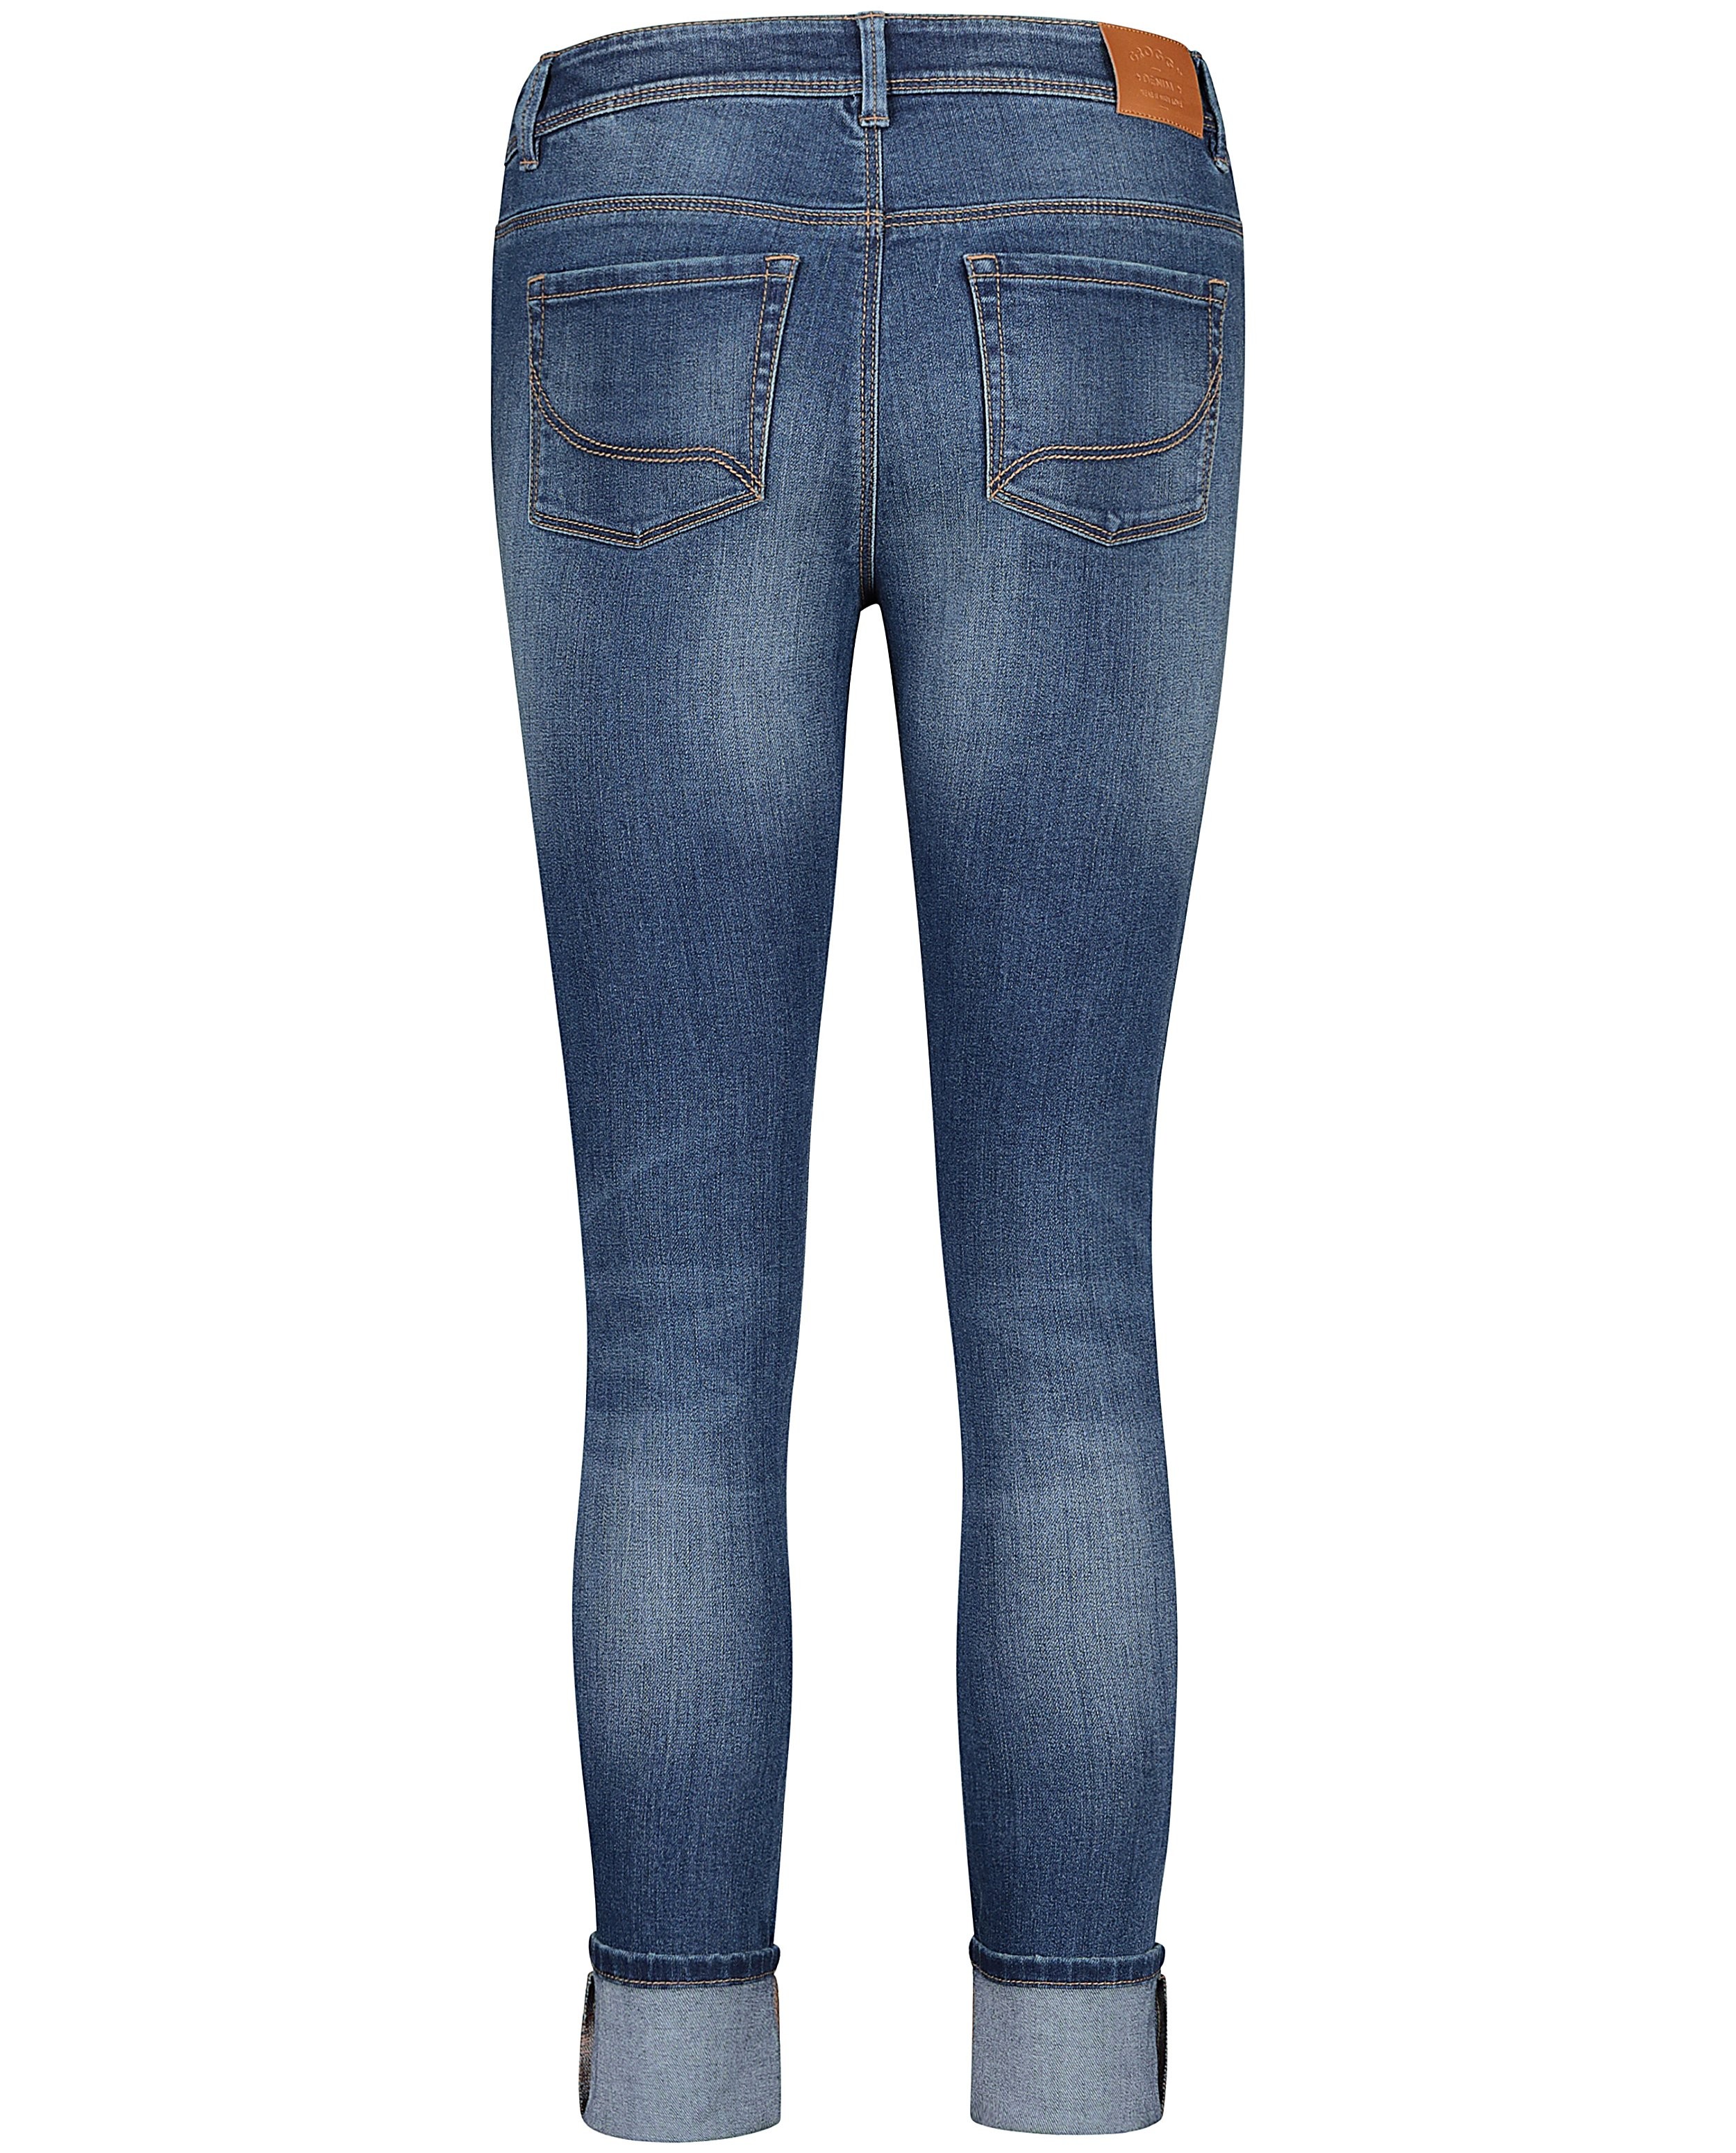 Jeans - Superskinny jeans